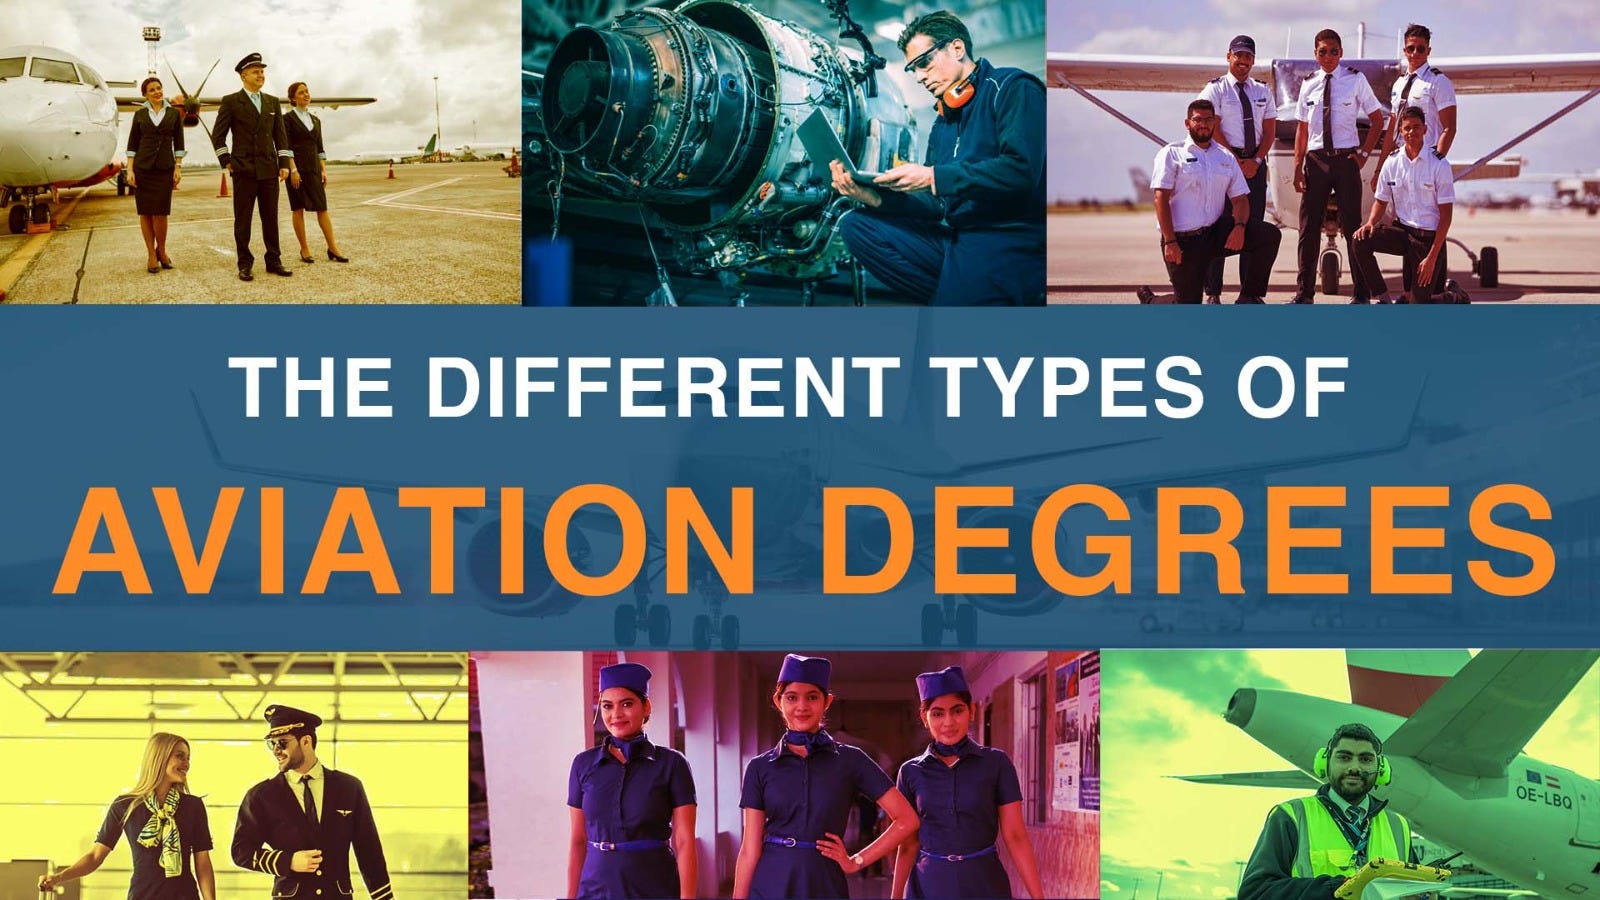 The Different Types of Aviation Degrees: What are the different specia